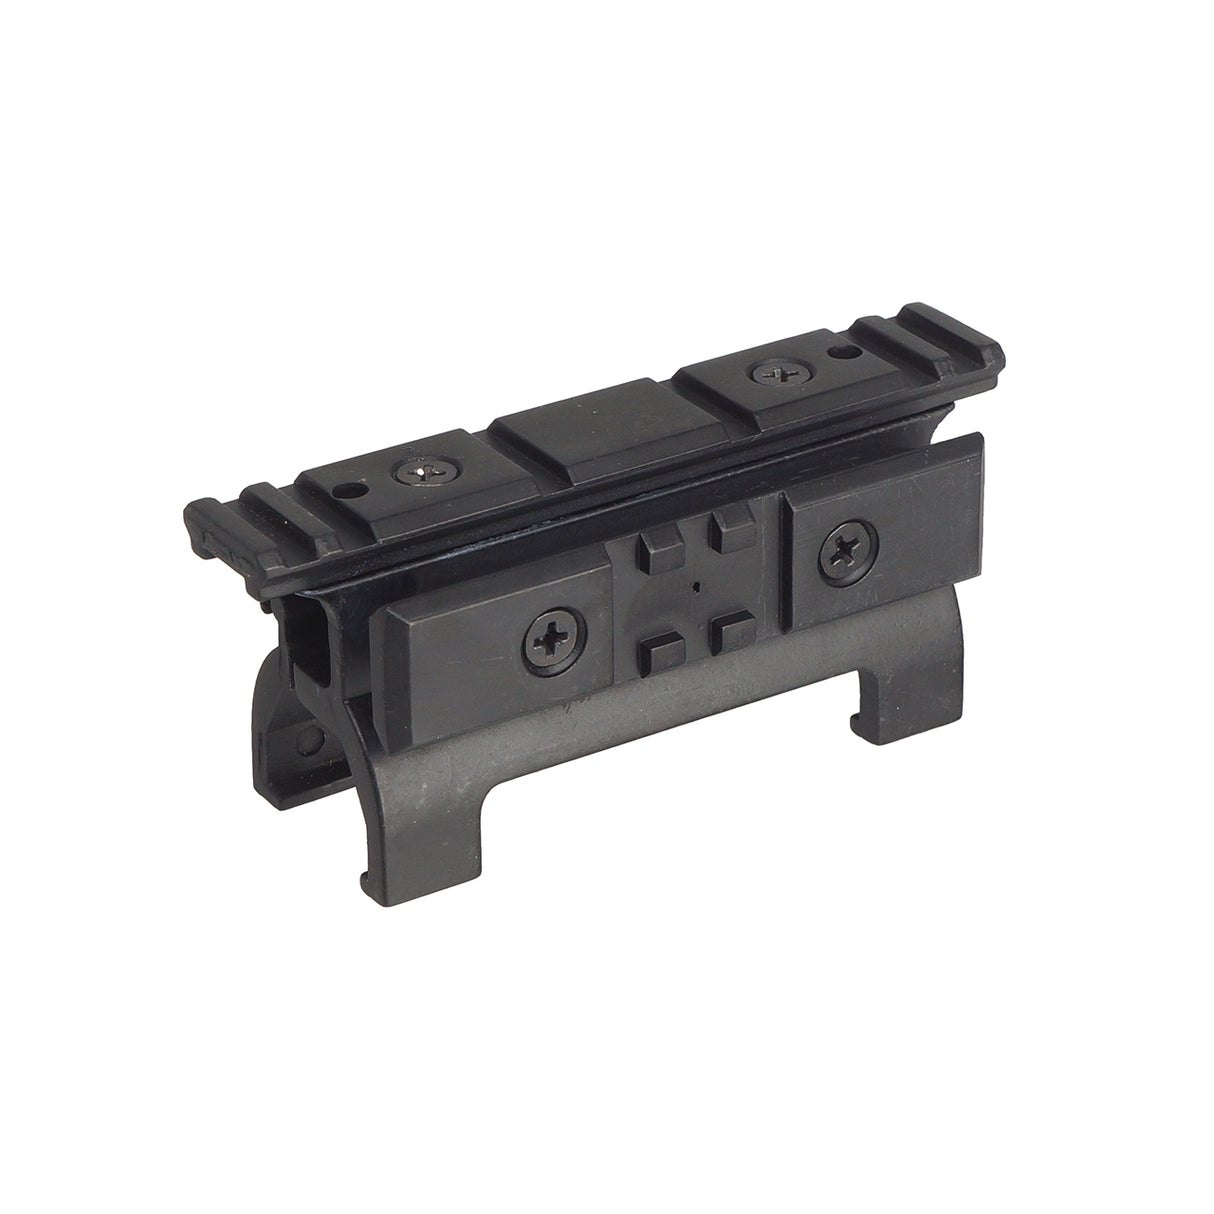 WELL Rail Mount Base for MP5 Series ( WELL-AC002 )